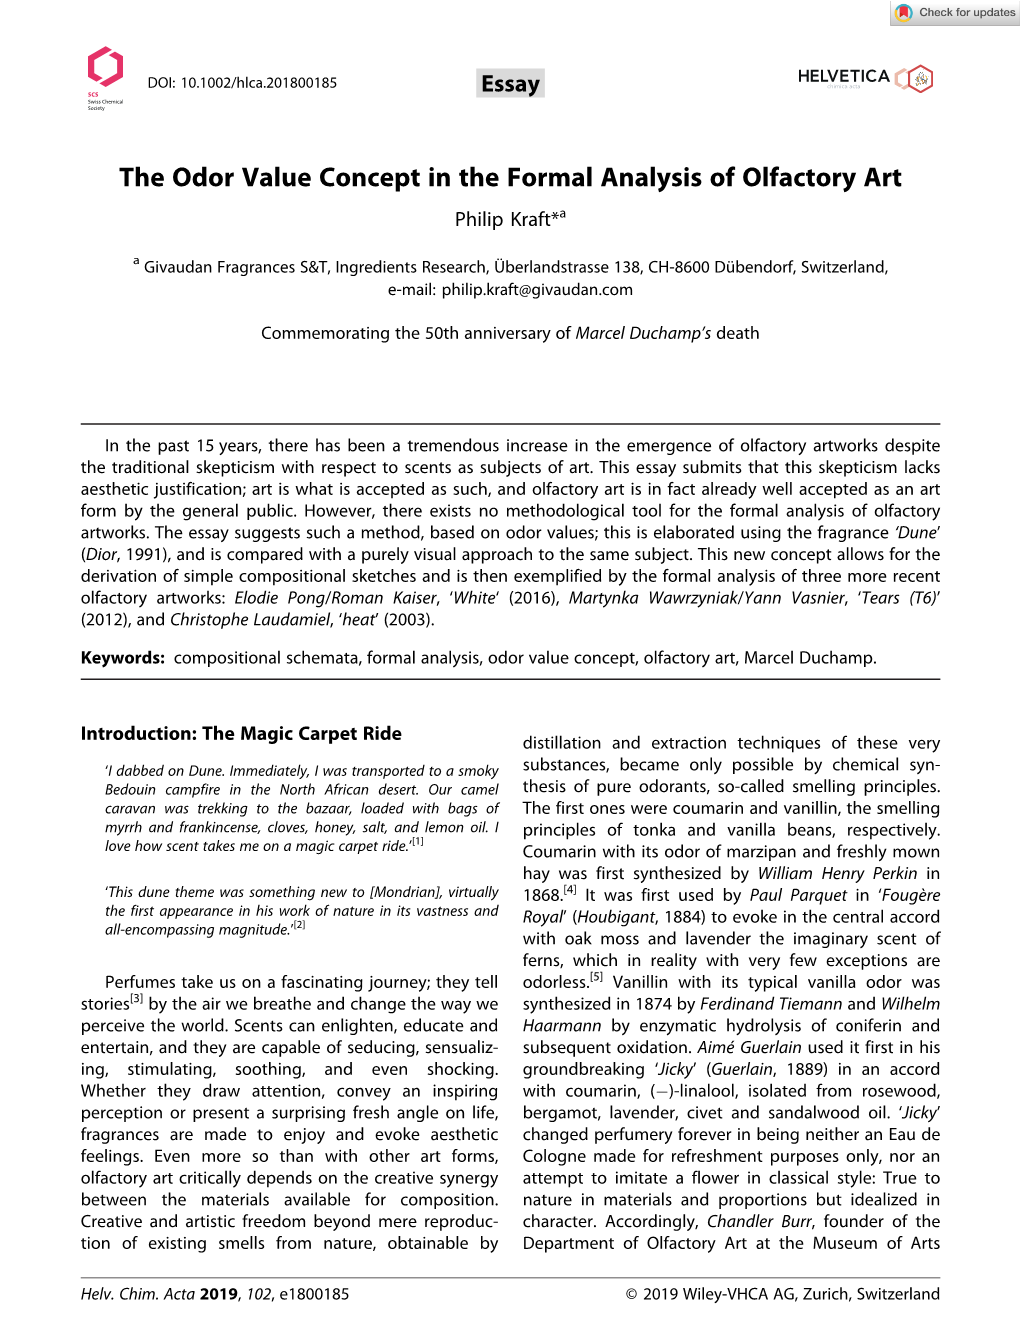 The Odor Value Concept in the Formal Analysis of Olfactory Art Philip Kraft*A